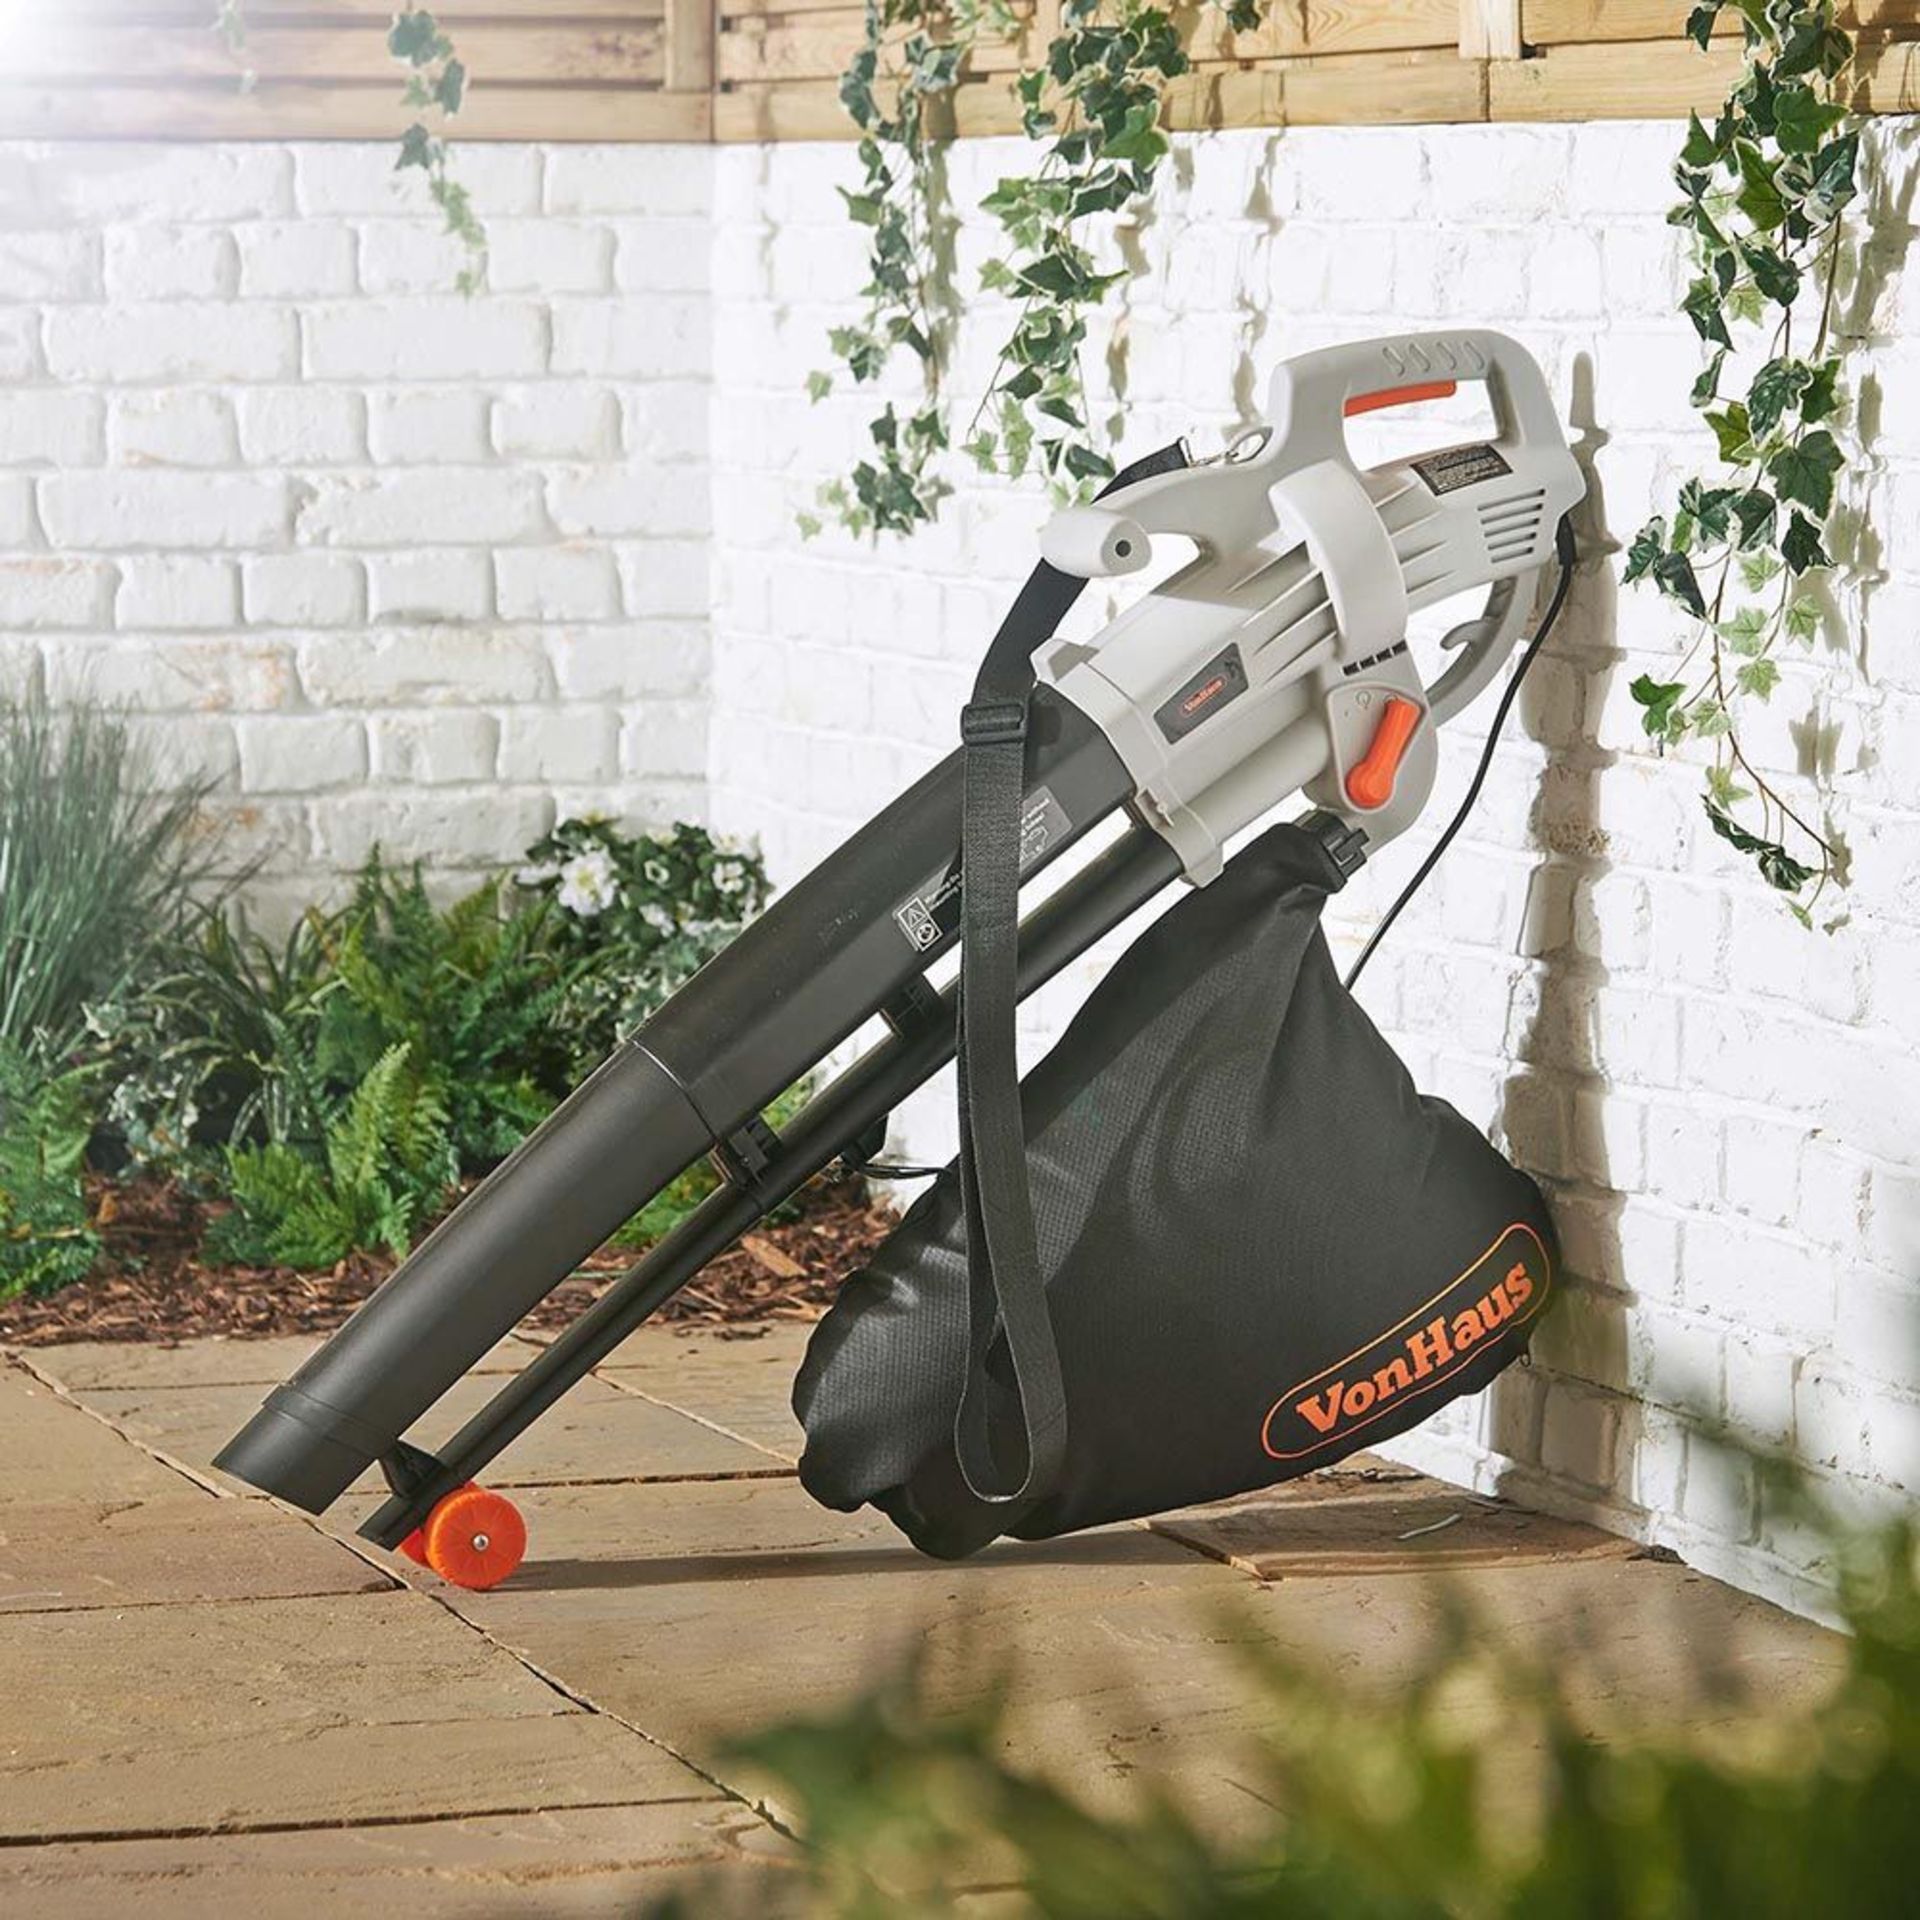 (K7) 3000W Leaf Blower Powerful 3000W motor blows, vacuums and mulches leaves Automatic mul... - Image 2 of 3